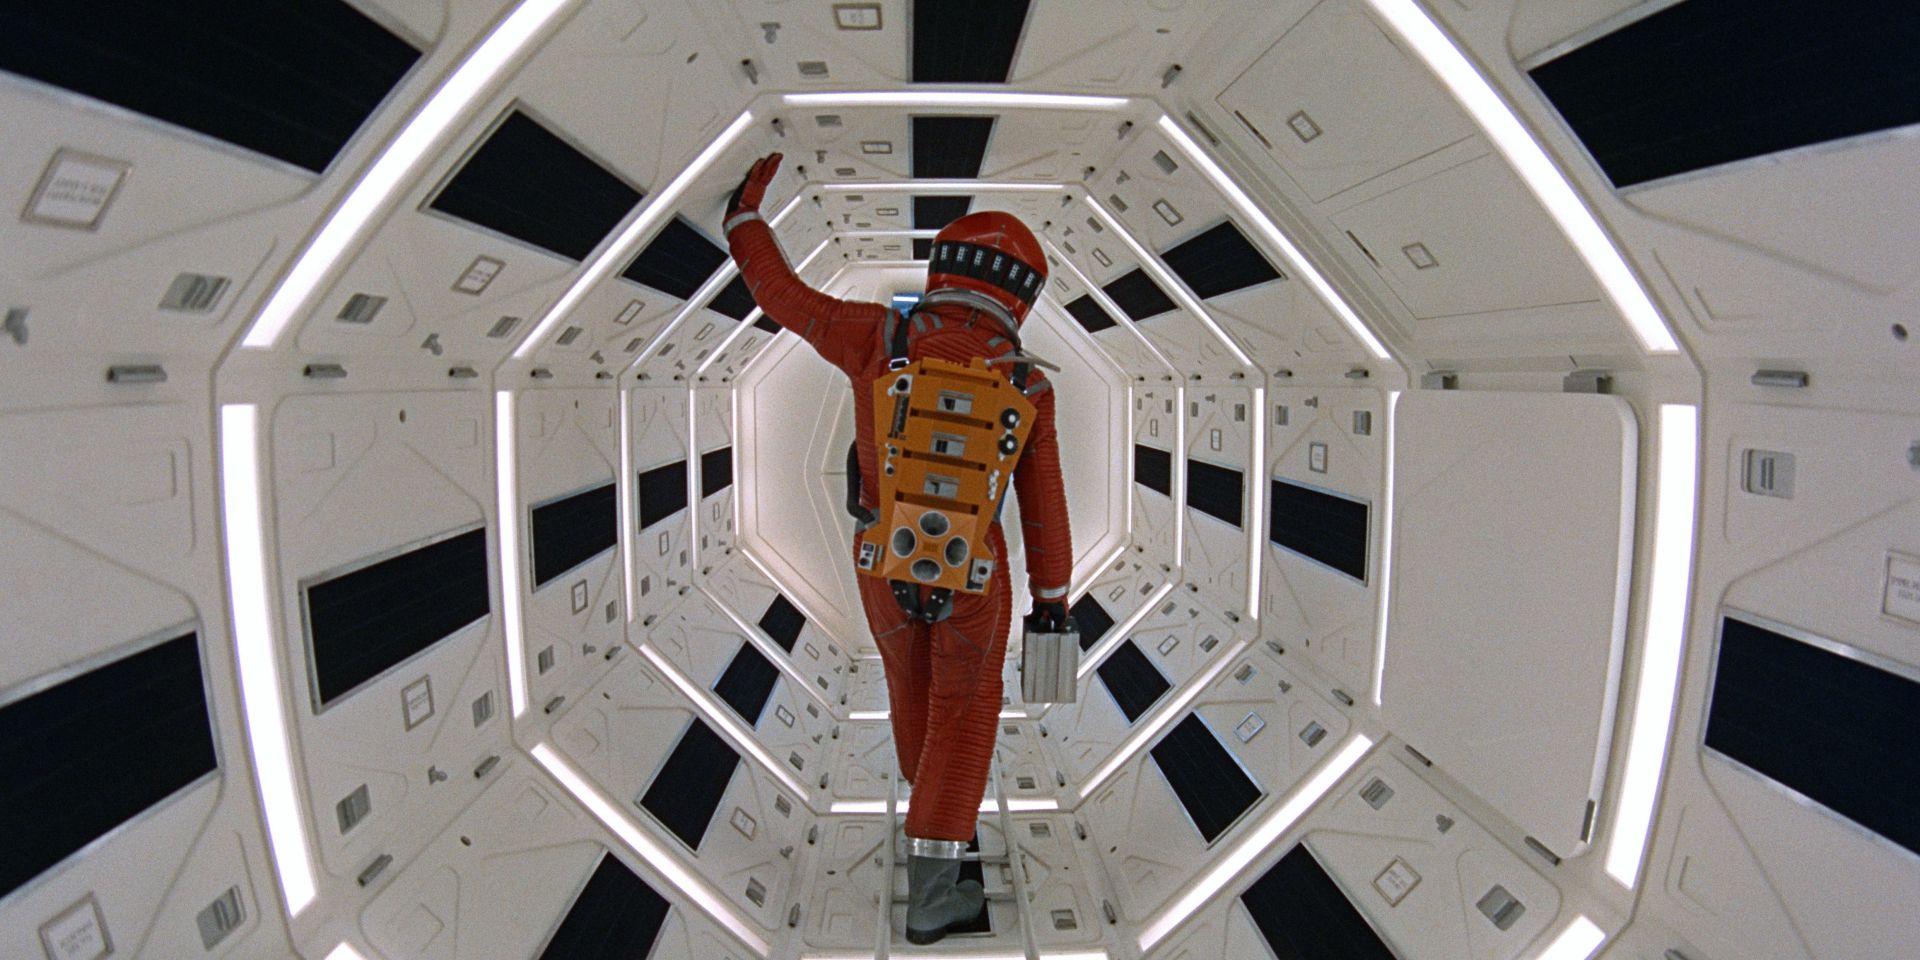 The 10 Most Confusing Sci-Fi Movies, According To Reddit